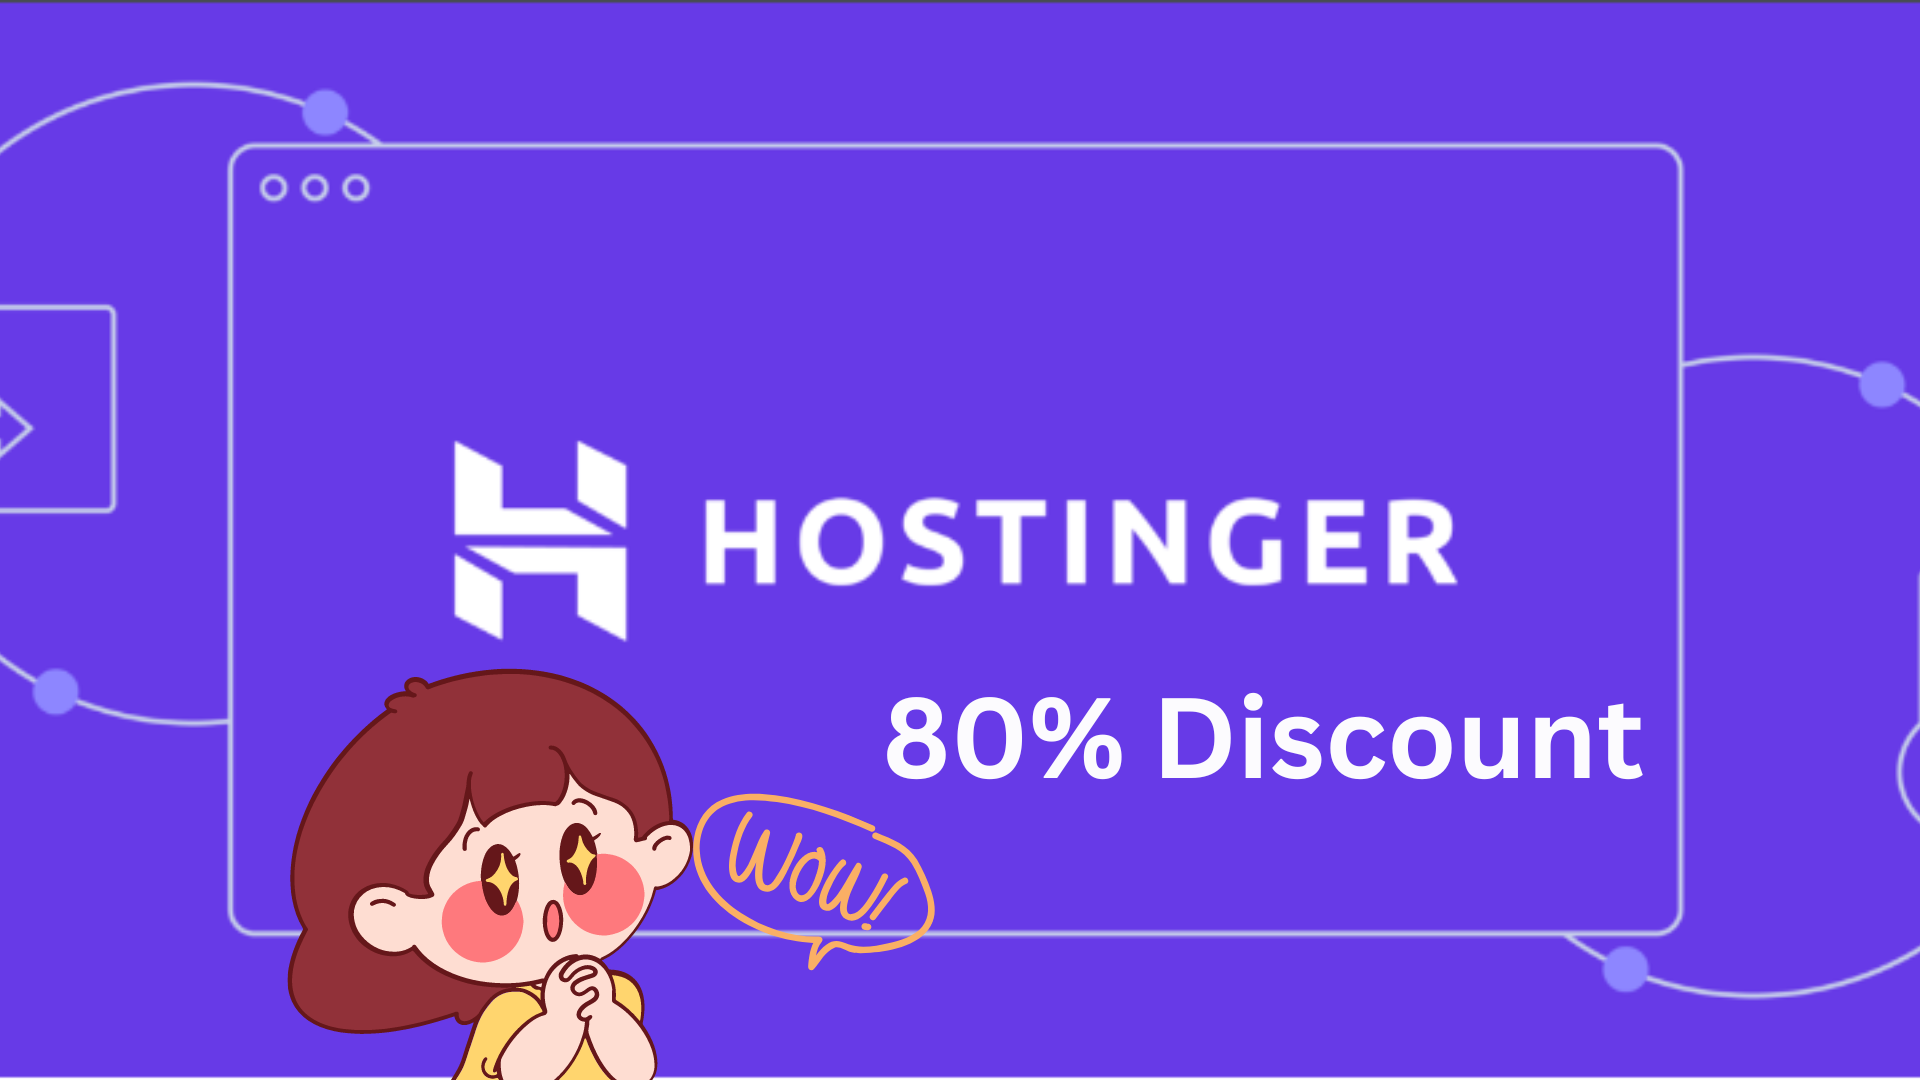 How to Buy a Hosting Plan in Hostinger with an 80% Discount